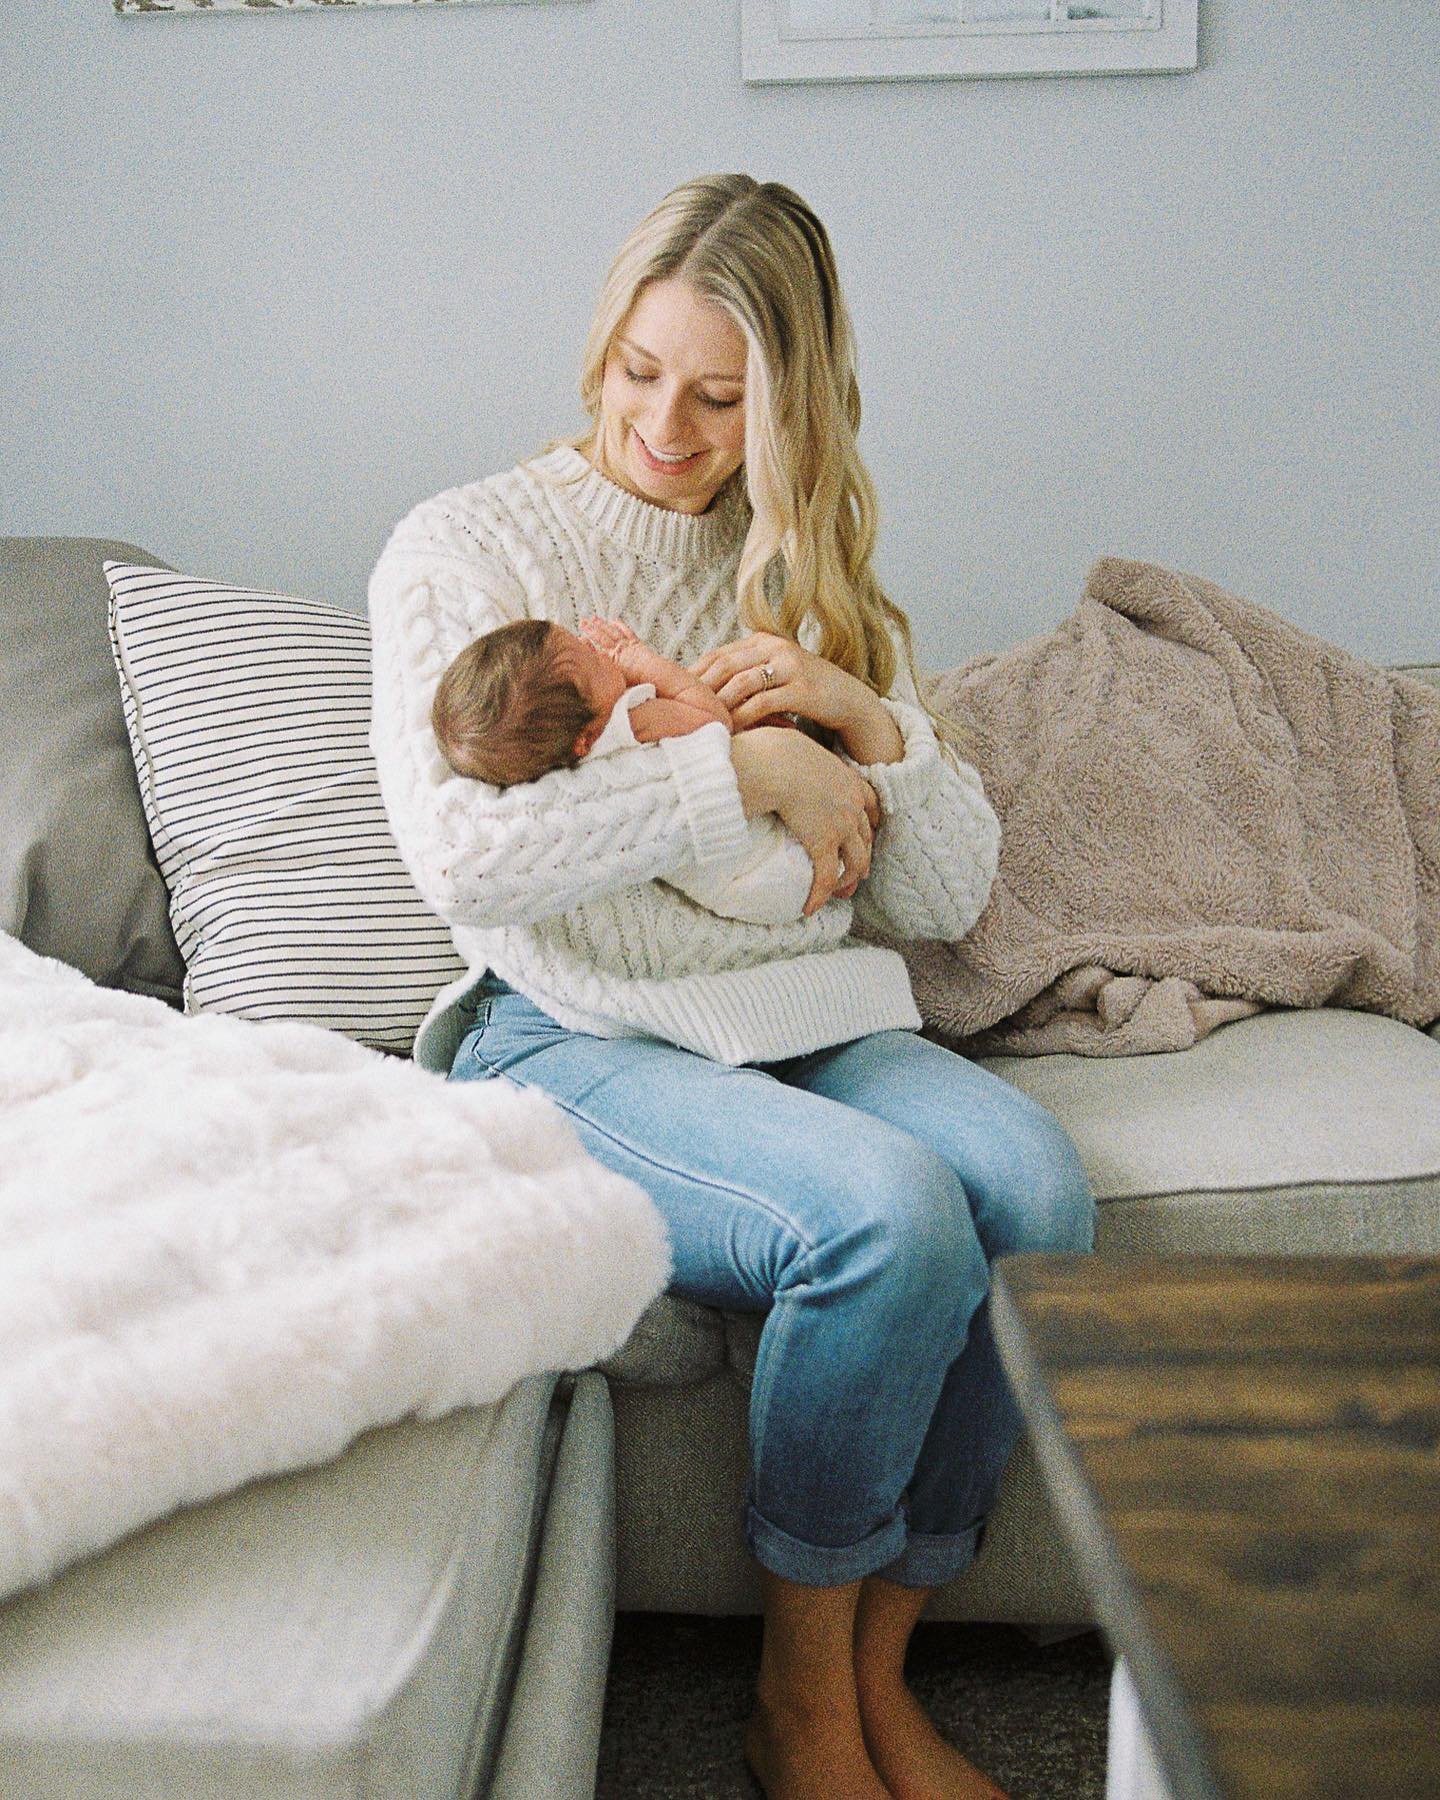 FILM FRIDAY!! 

Sharing these precious moments from an in home newborn session captured on 35mm film. 

Option to add a roll of film to your sessions is included in my new price guide!